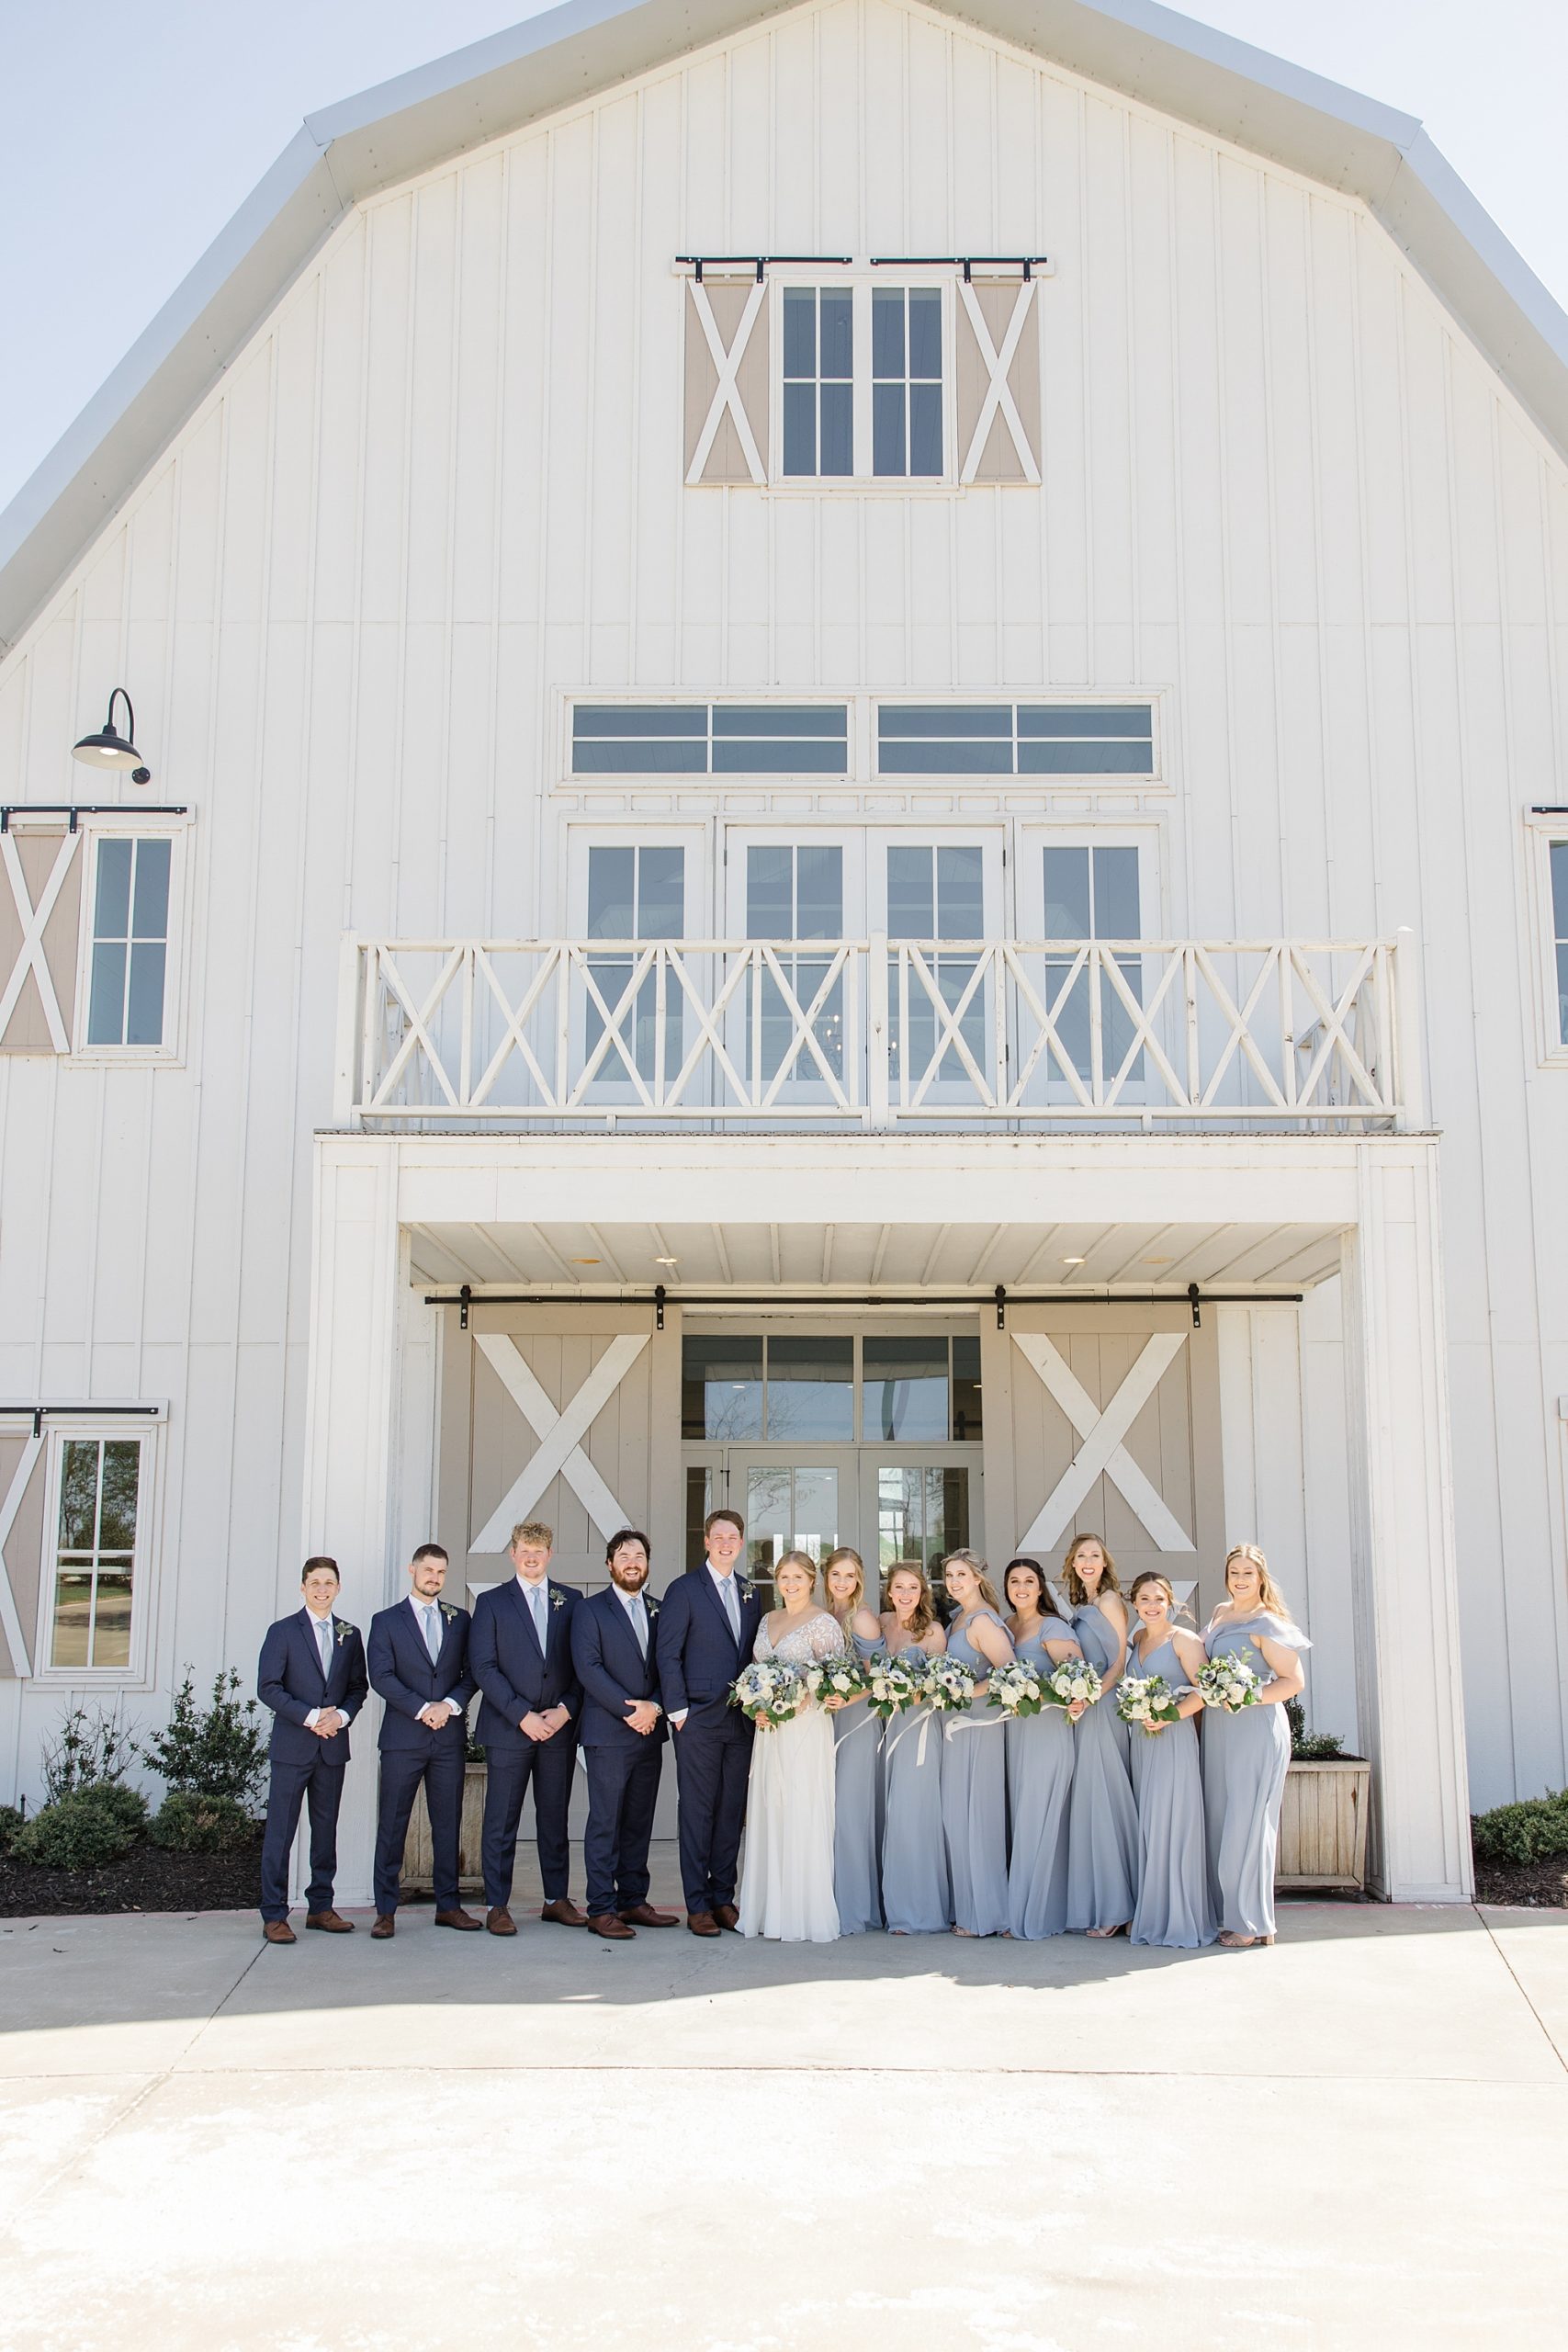 bride and groom stand with wedding party in navy suits and blue gowns